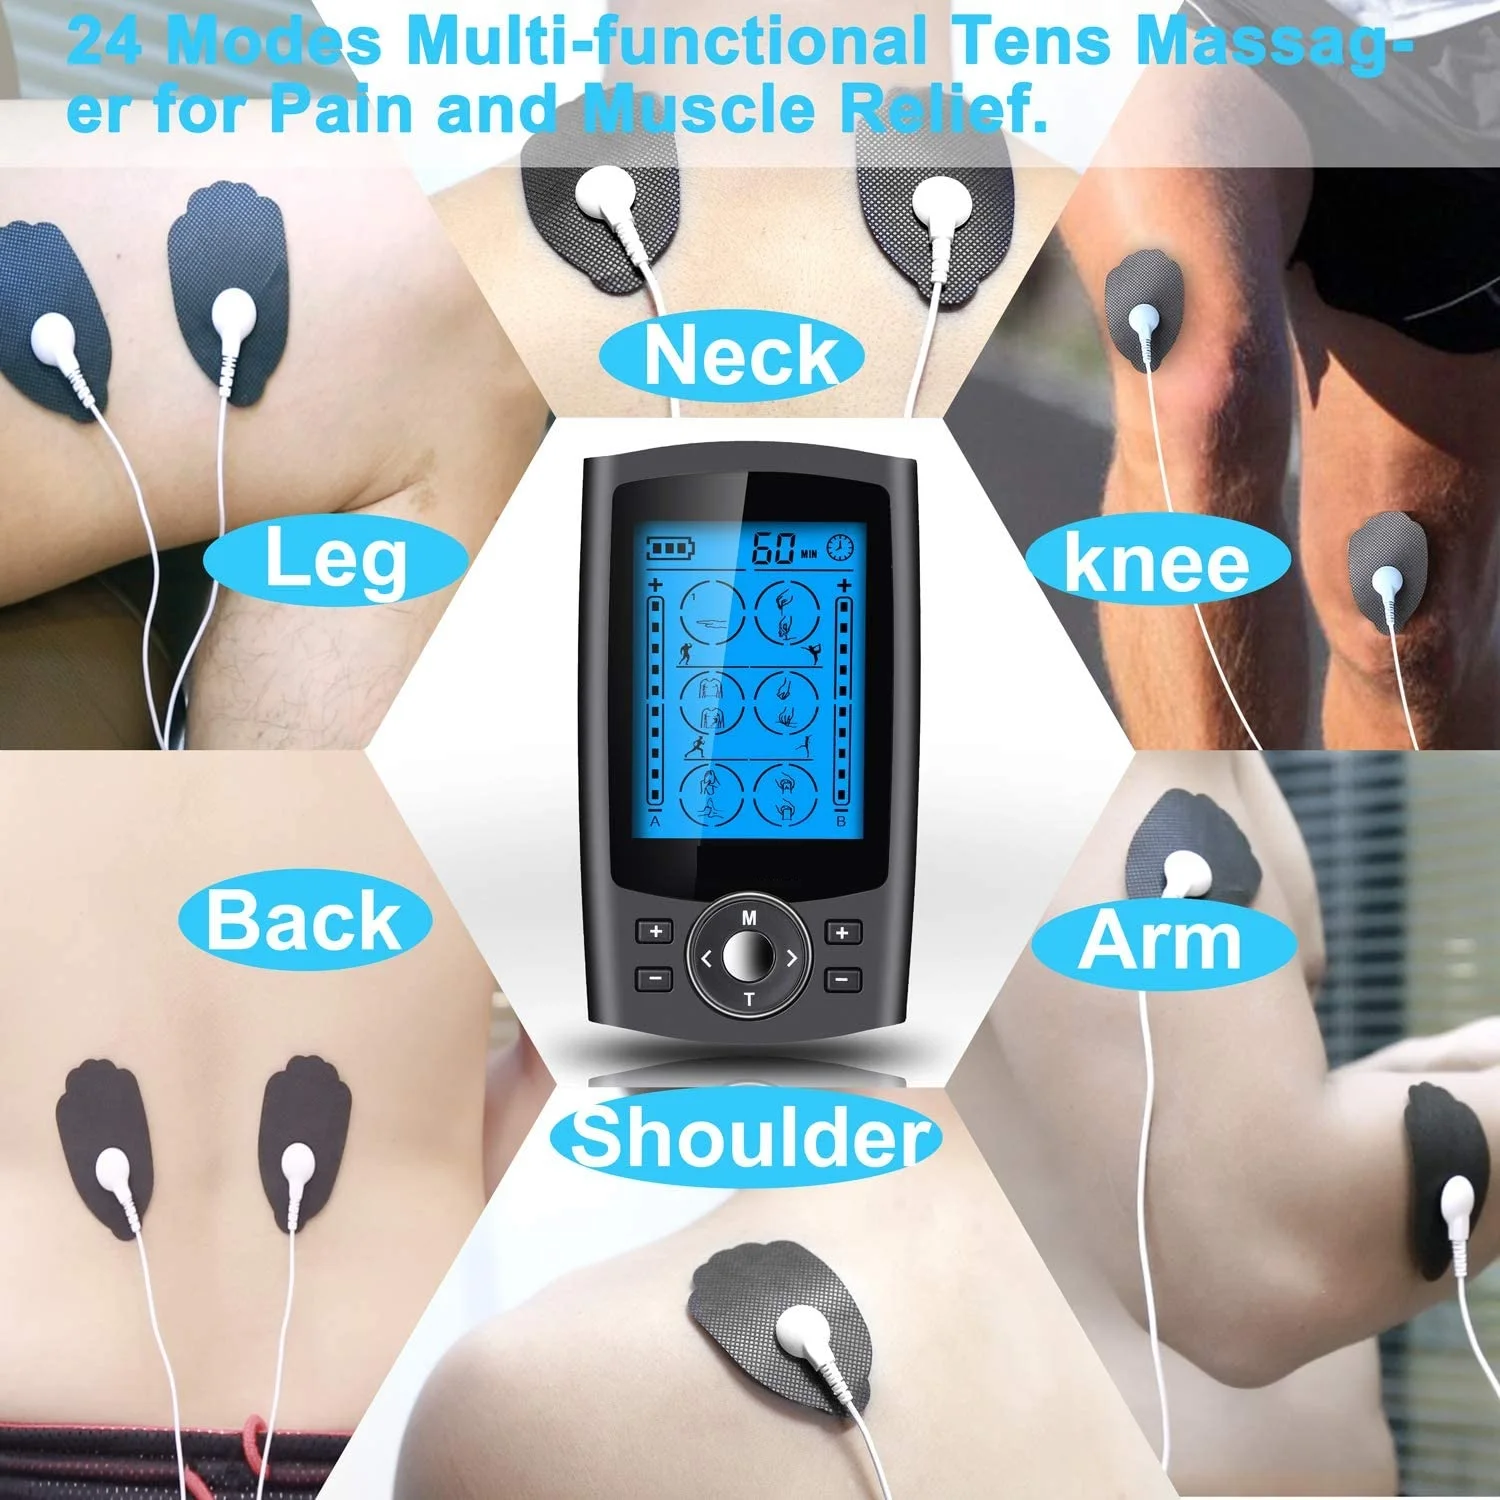 24 Modes Dual Channel TENS EMS Unit Muscle Stimulator for Pain